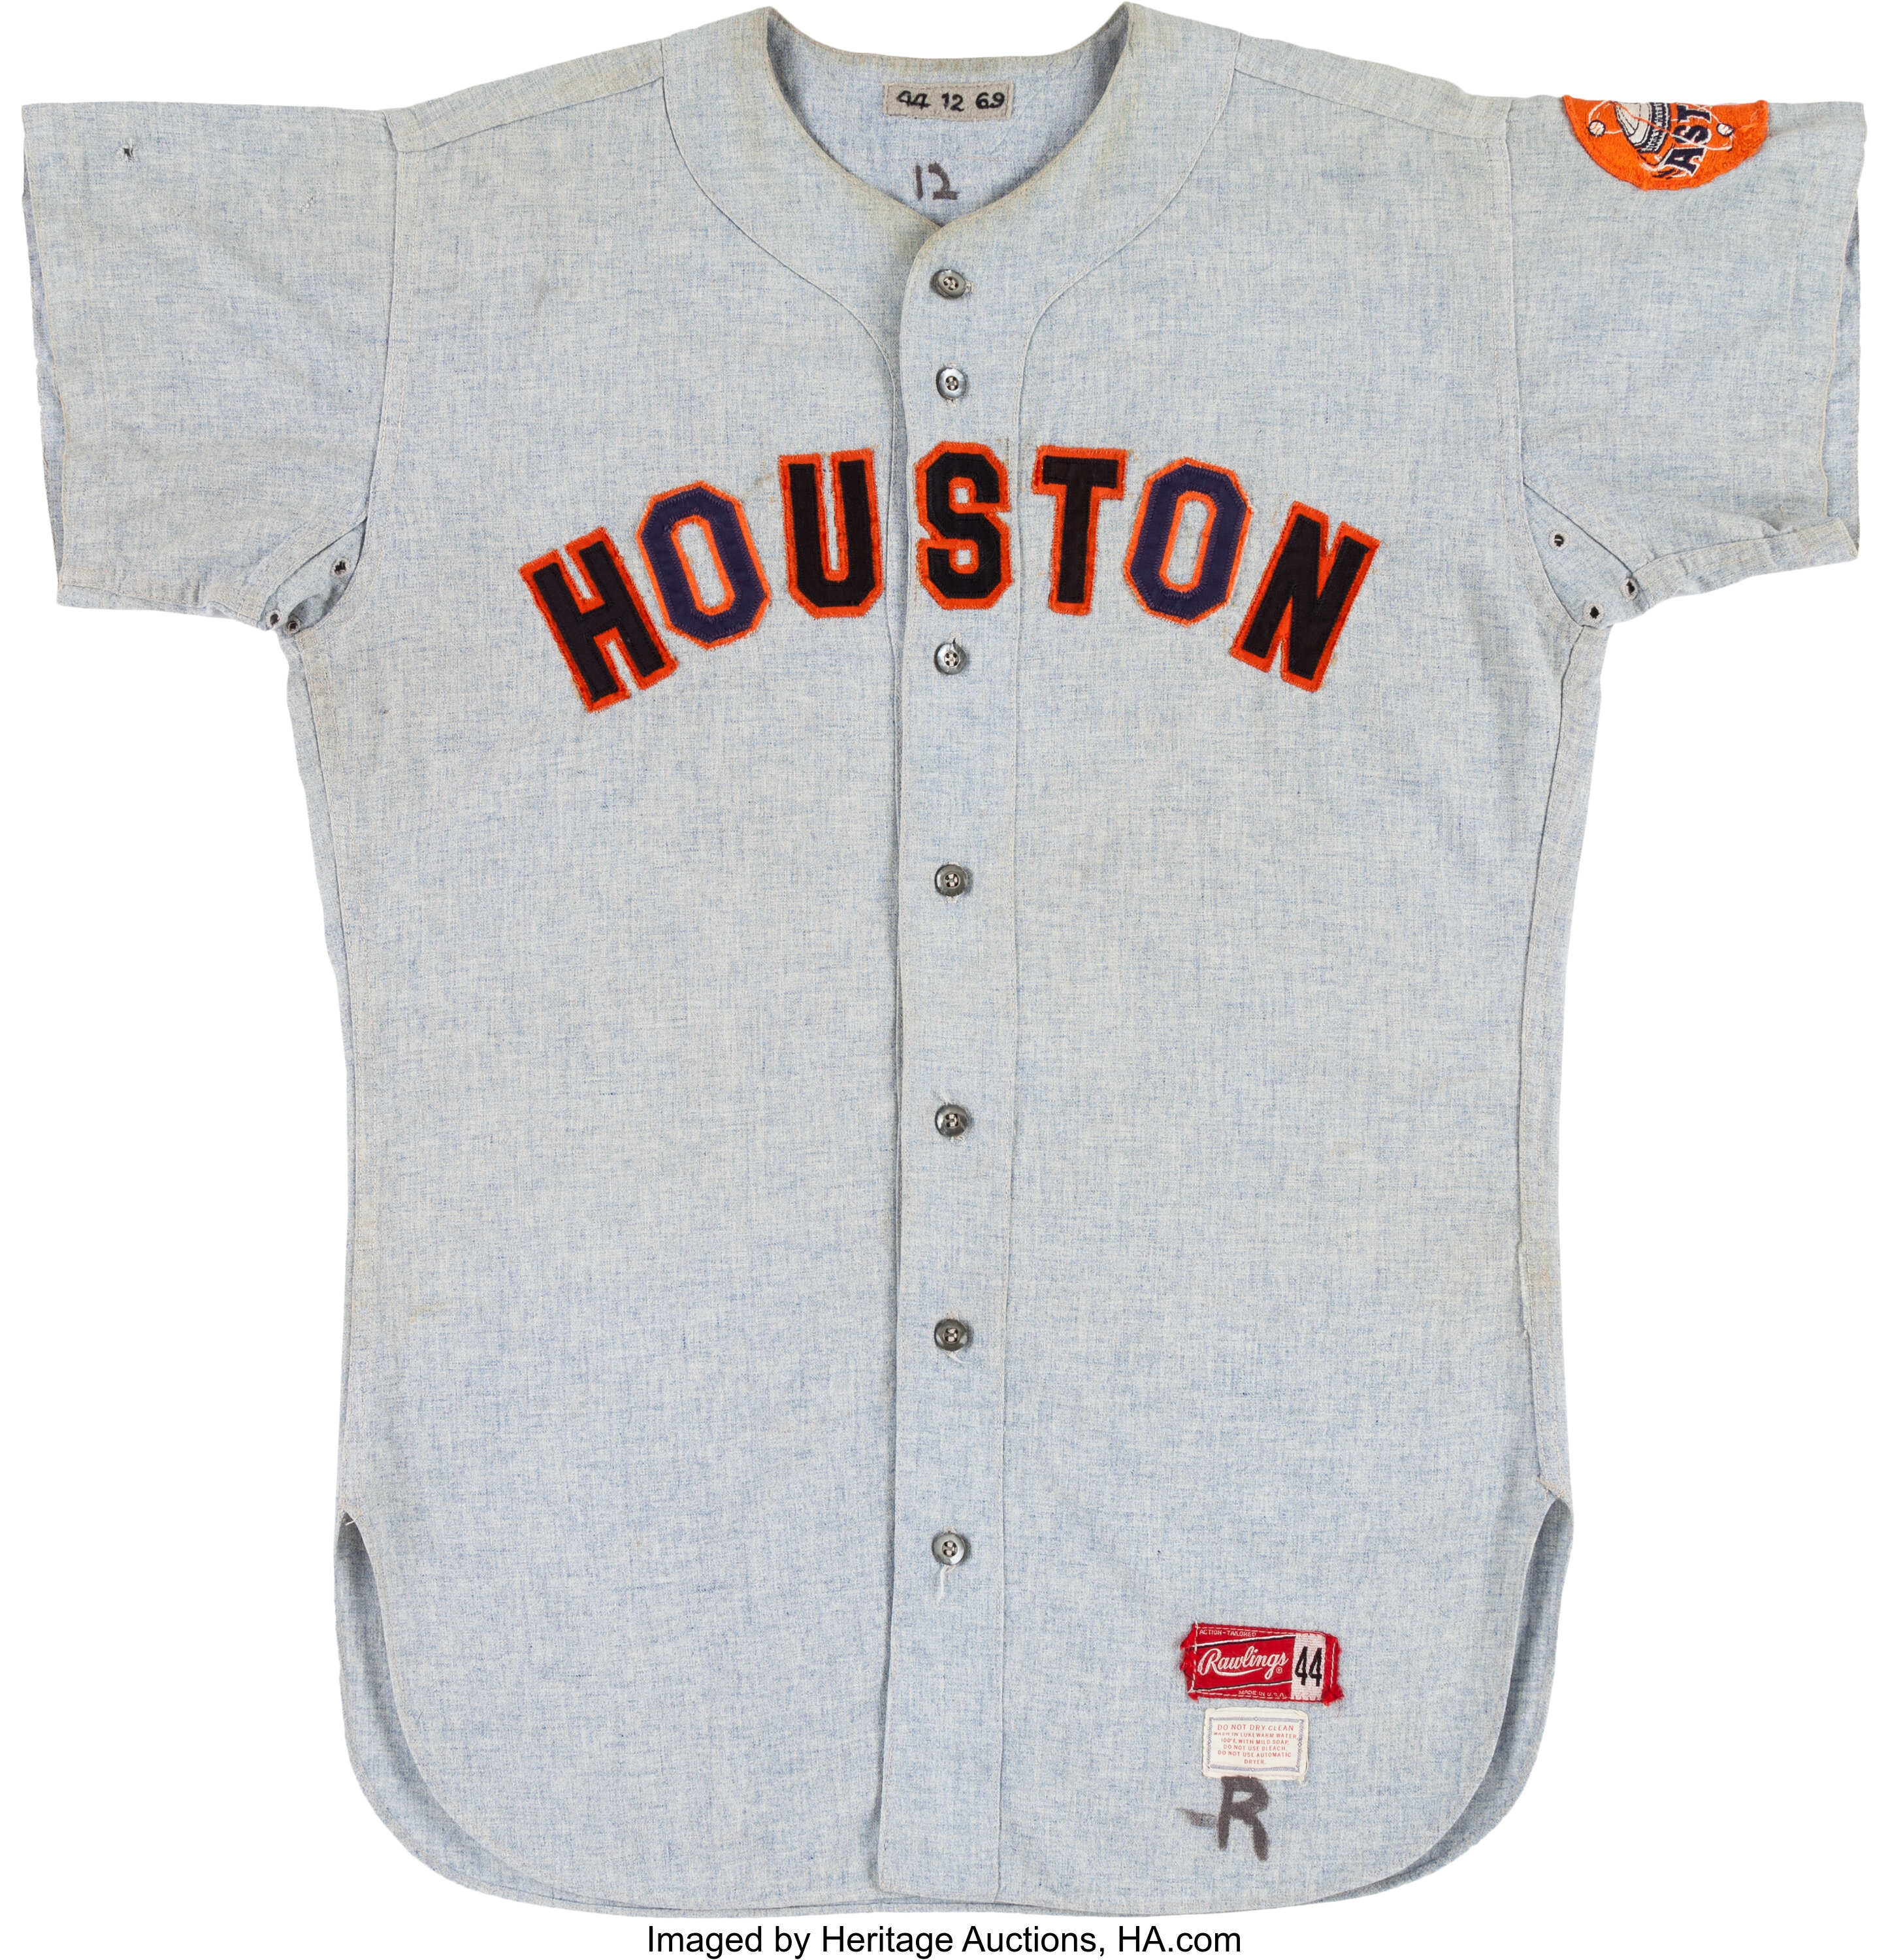 What jersey is this? : r/Astros